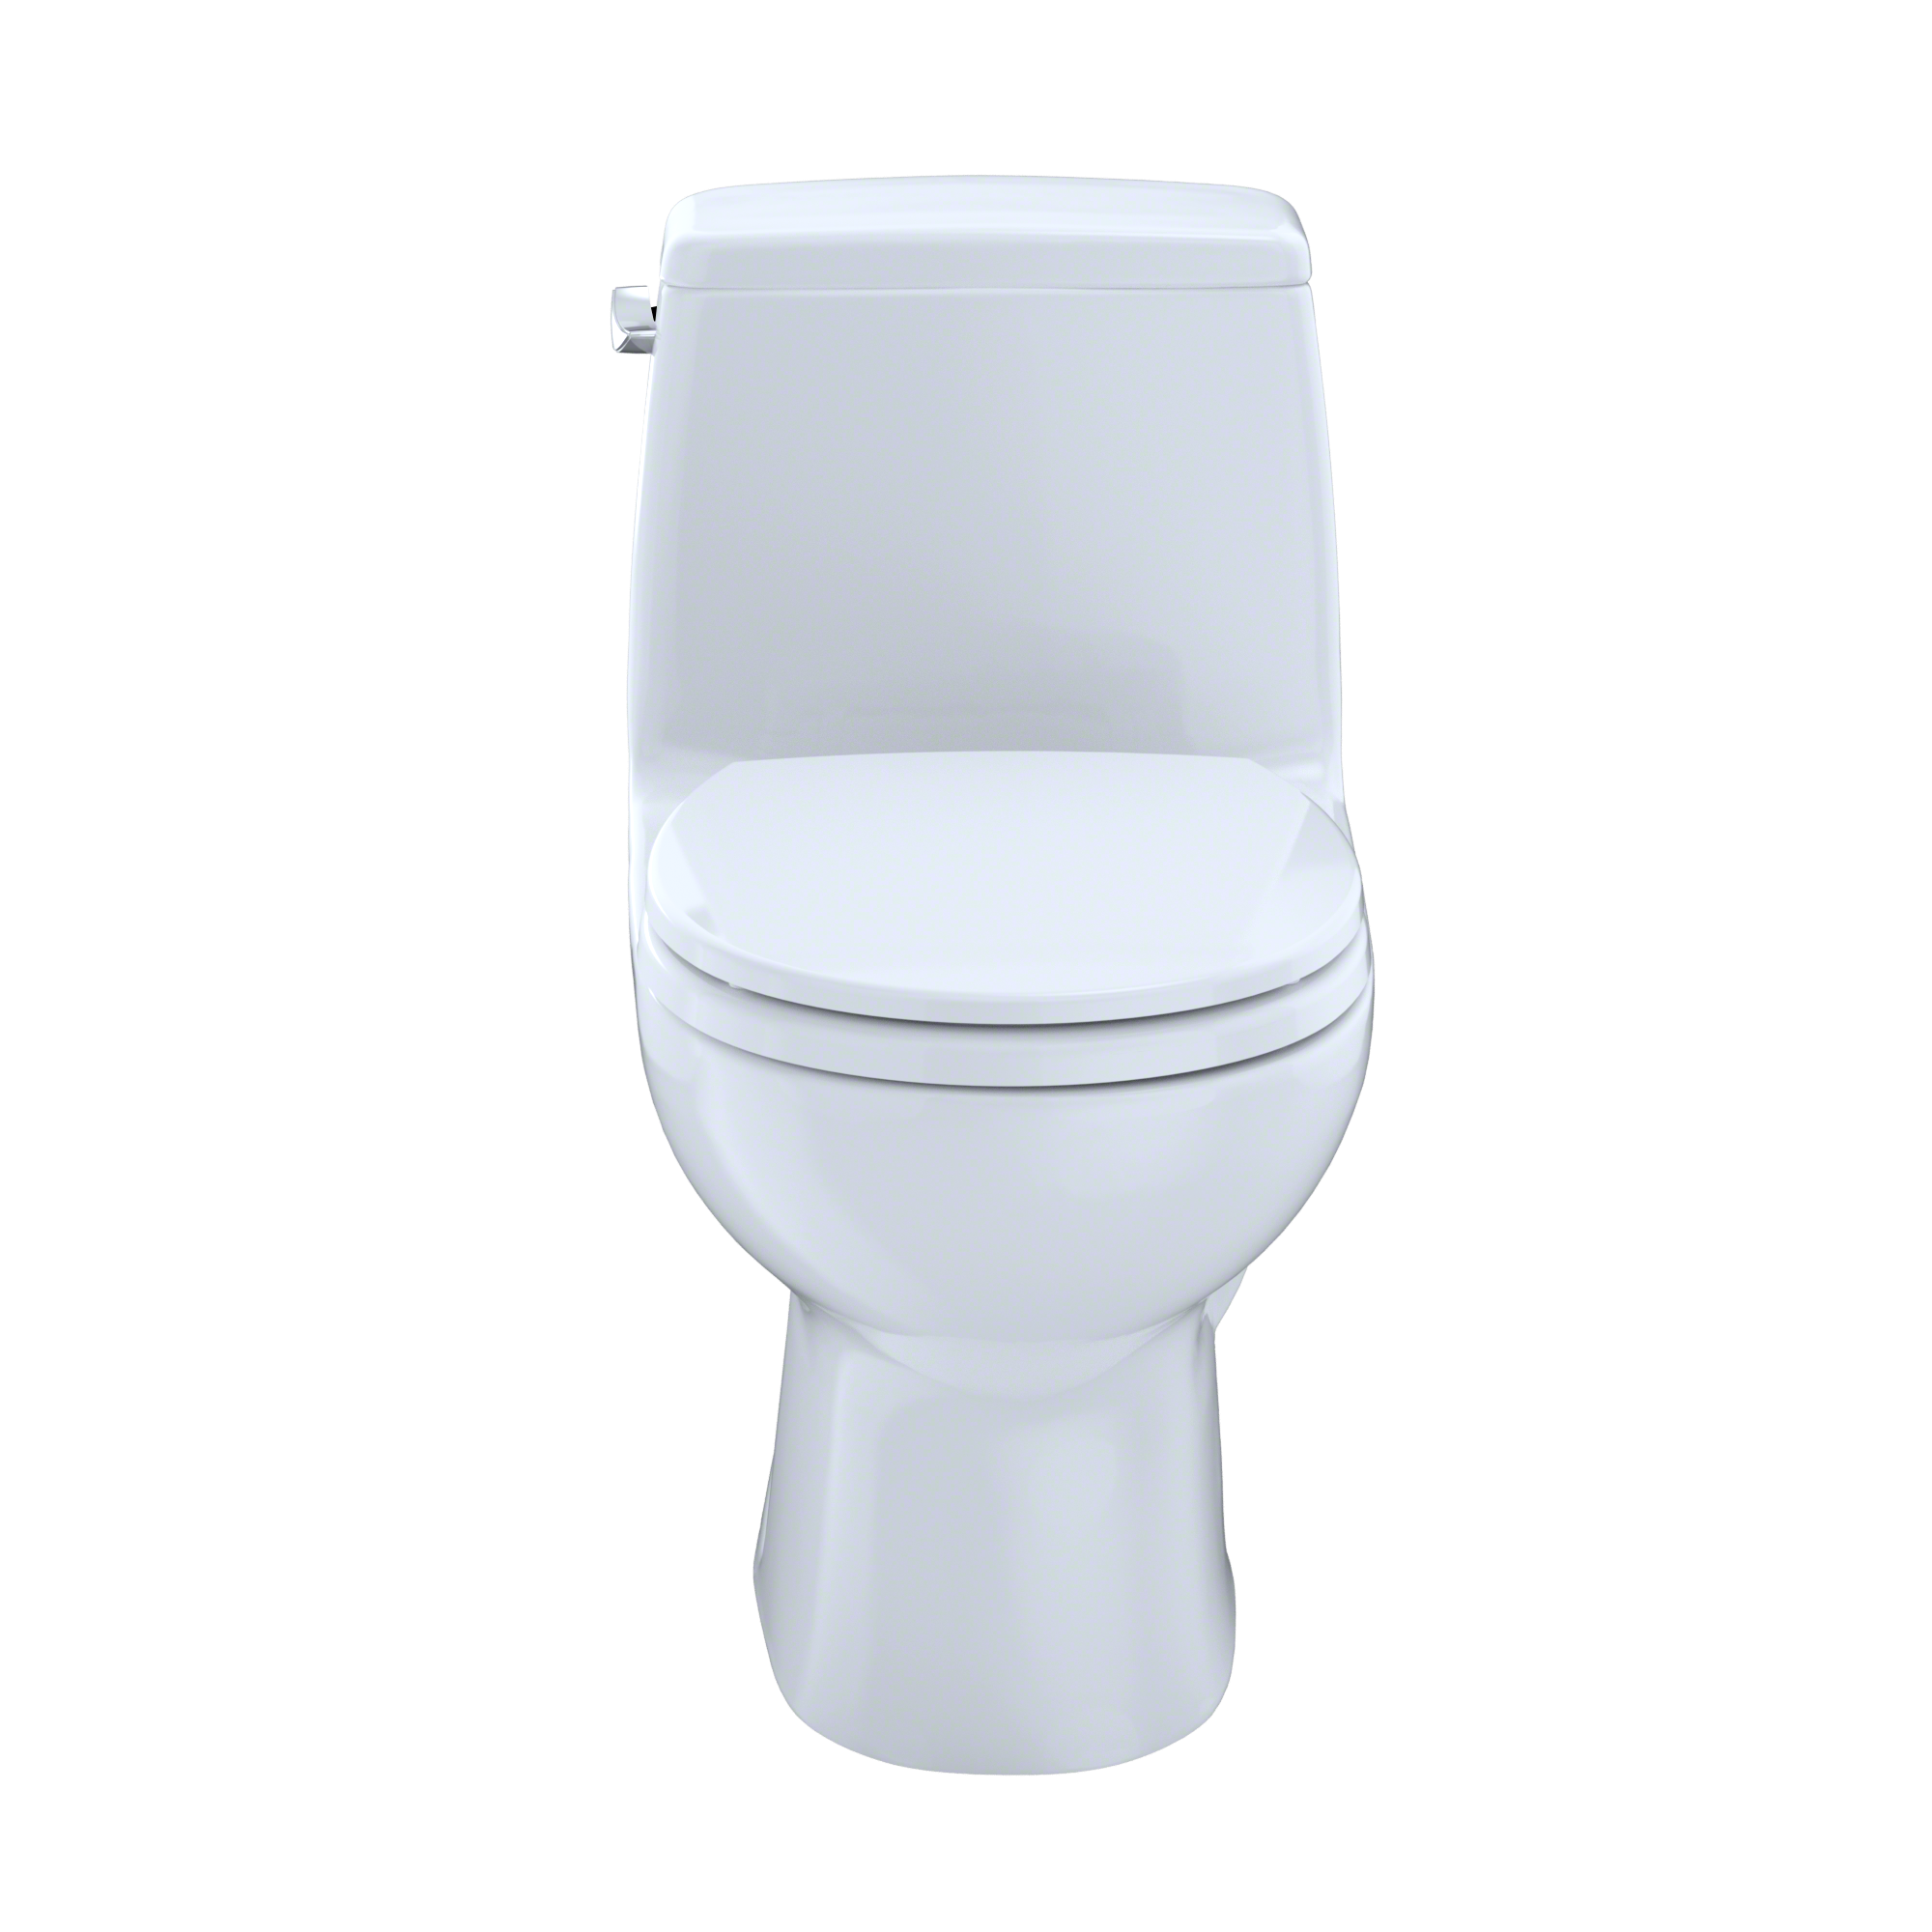 Toto Ms853113s Ultramax 1.6 Gpf One Piece Round Toilet - - Cotton - image 2 of 5